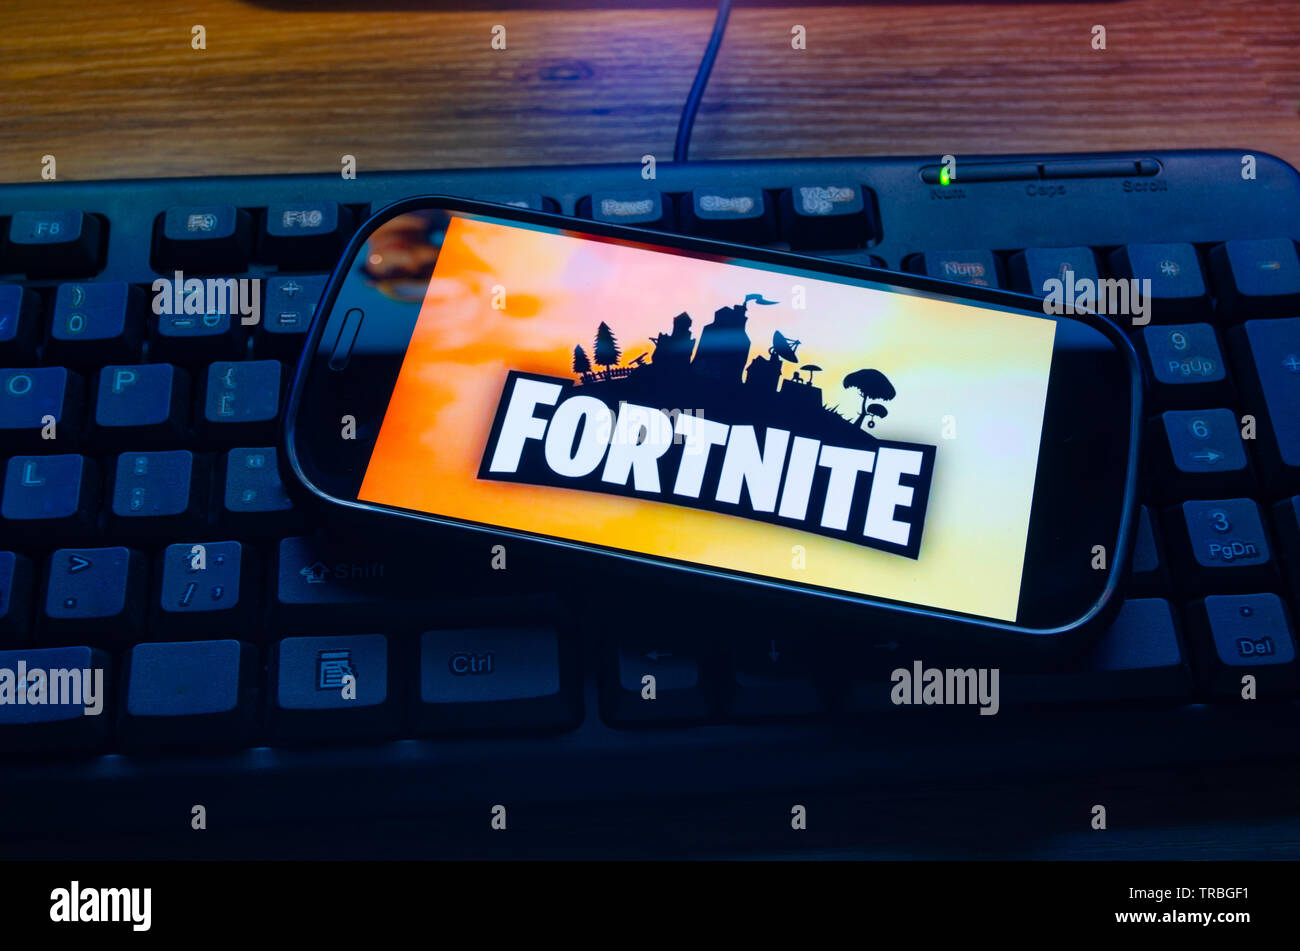 Epic games phone hi-res stock photography and images - Alamy